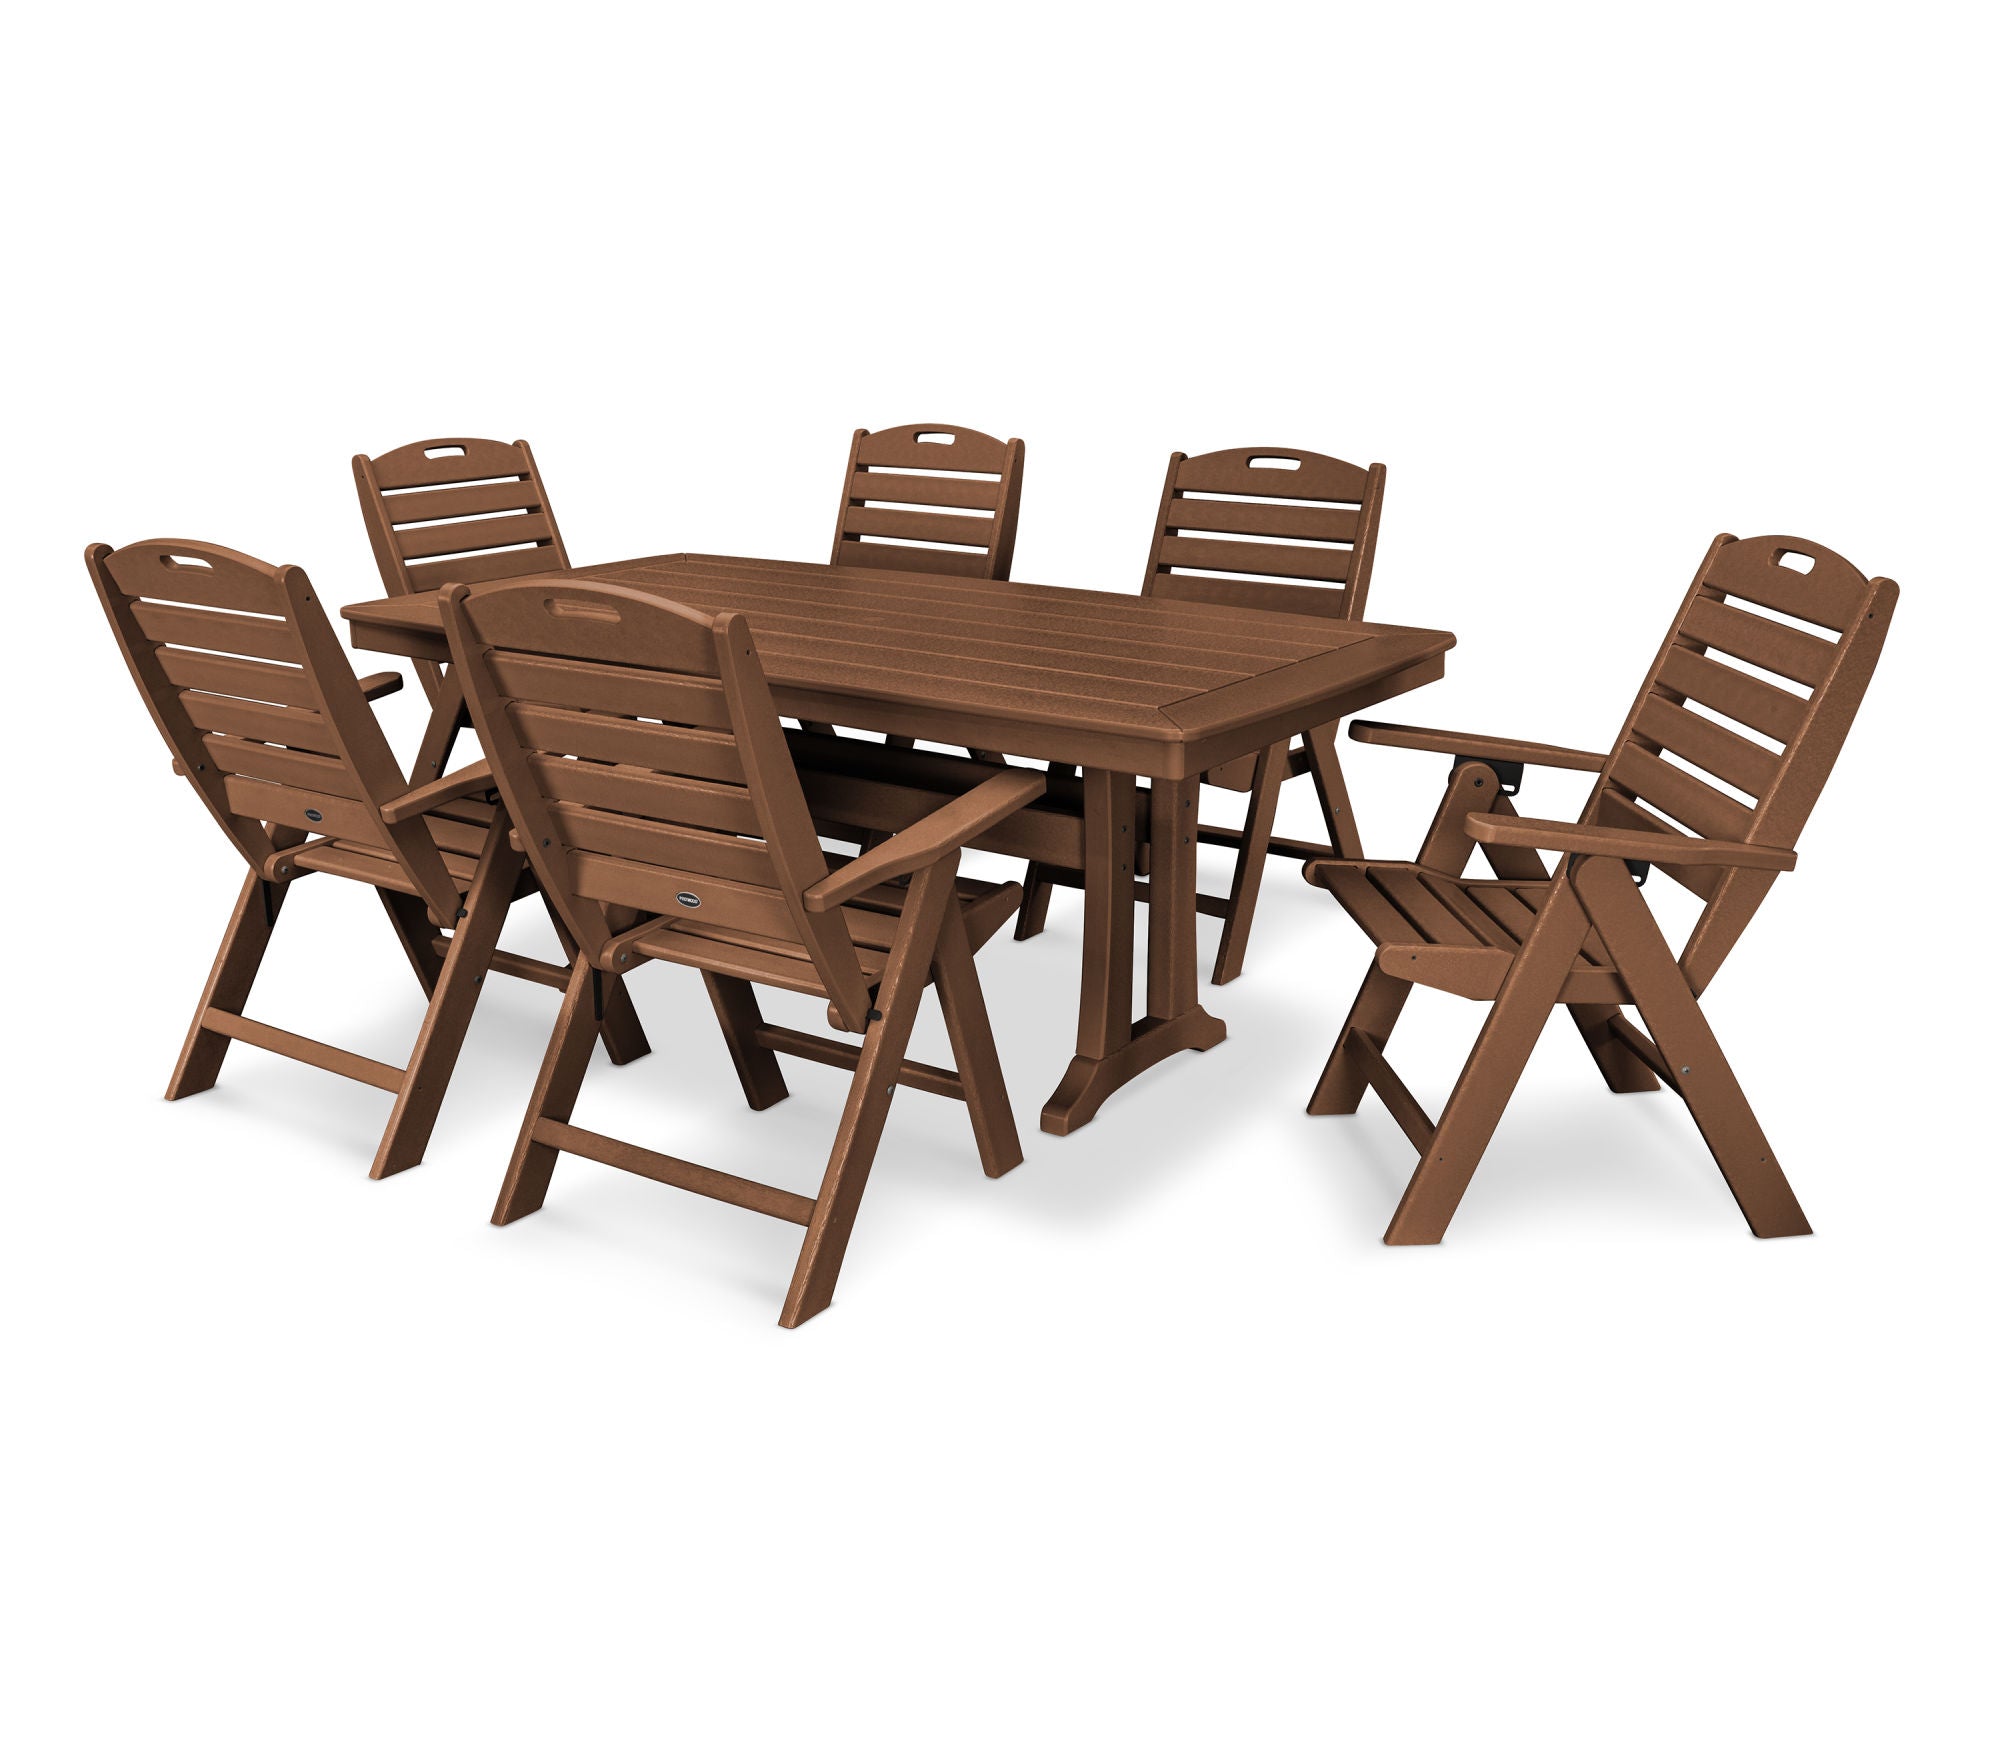 POLYWOOD 7-Piece Nautical Folding Highback Chair Dining Set with Trestle Legs